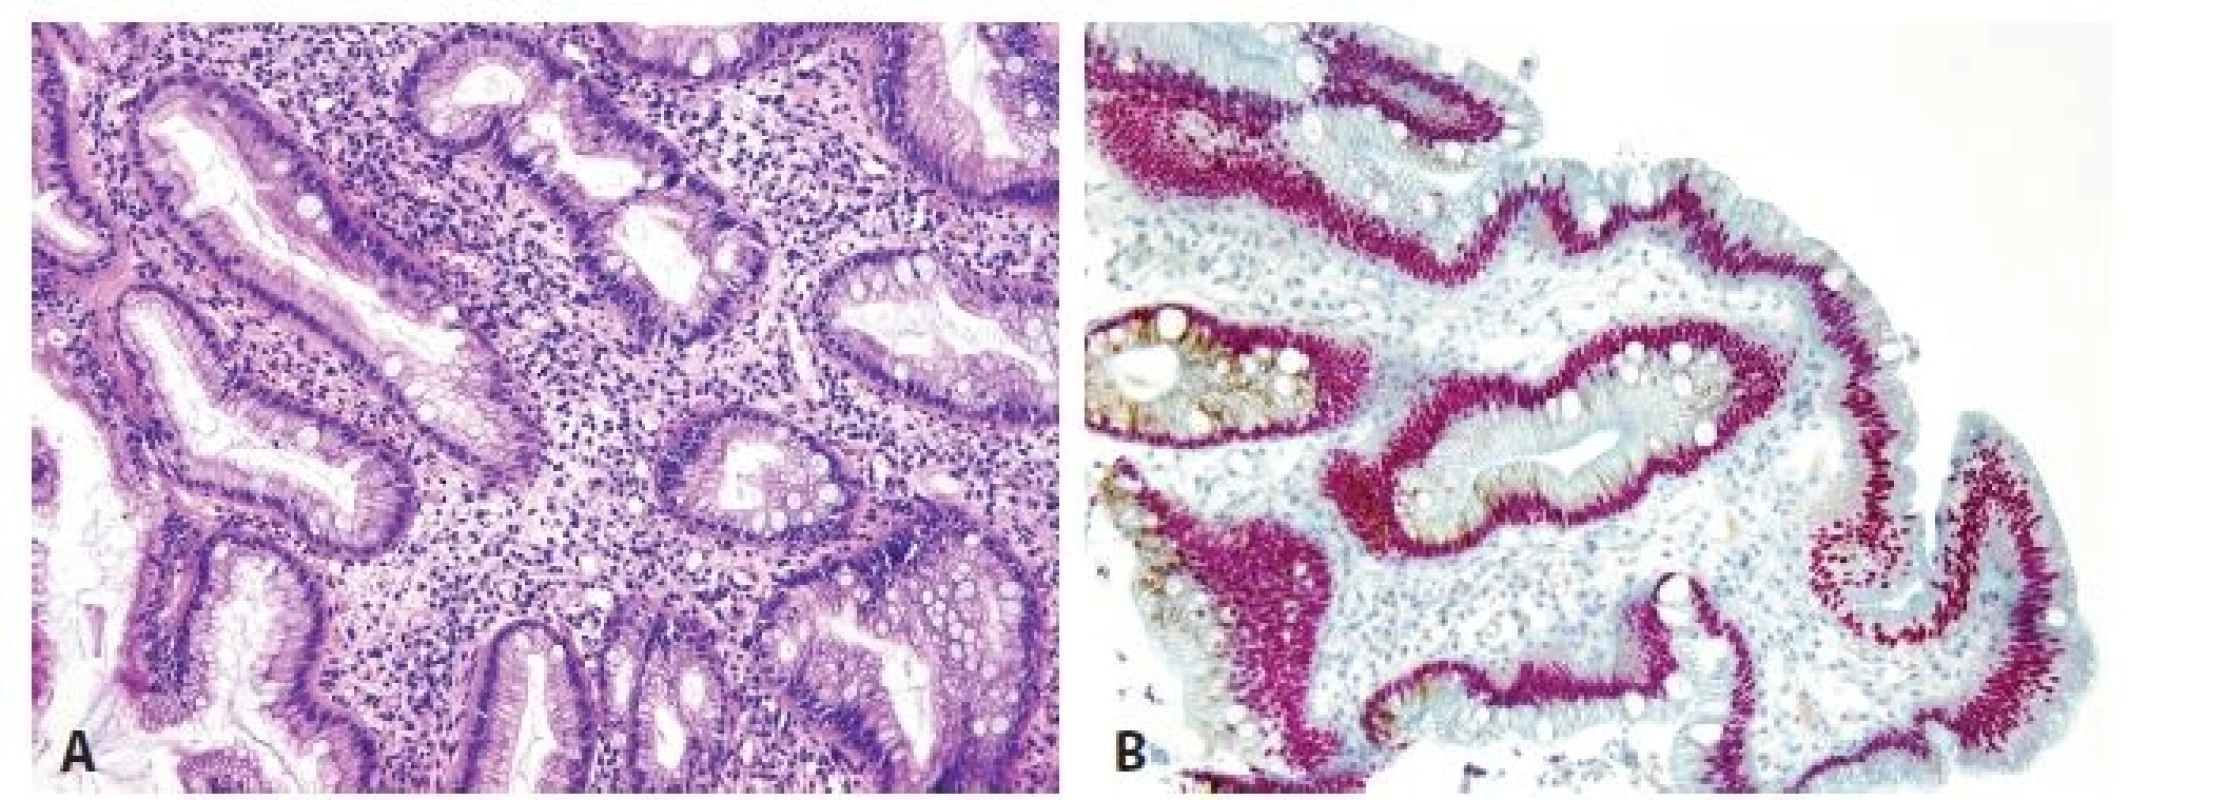 Esophageal incomplete intestinal metaplasia. A. Cylindrical cells with mucin production and without brush border. B. Double
immunohistochemical reaction shows nuclear positivity for CDX2 (red) and cytoplasmic expression for MUC5AC (brown). No
cell with negativity of CDX2 and positivity of MUC5AC is seen (original magnifications 200x).